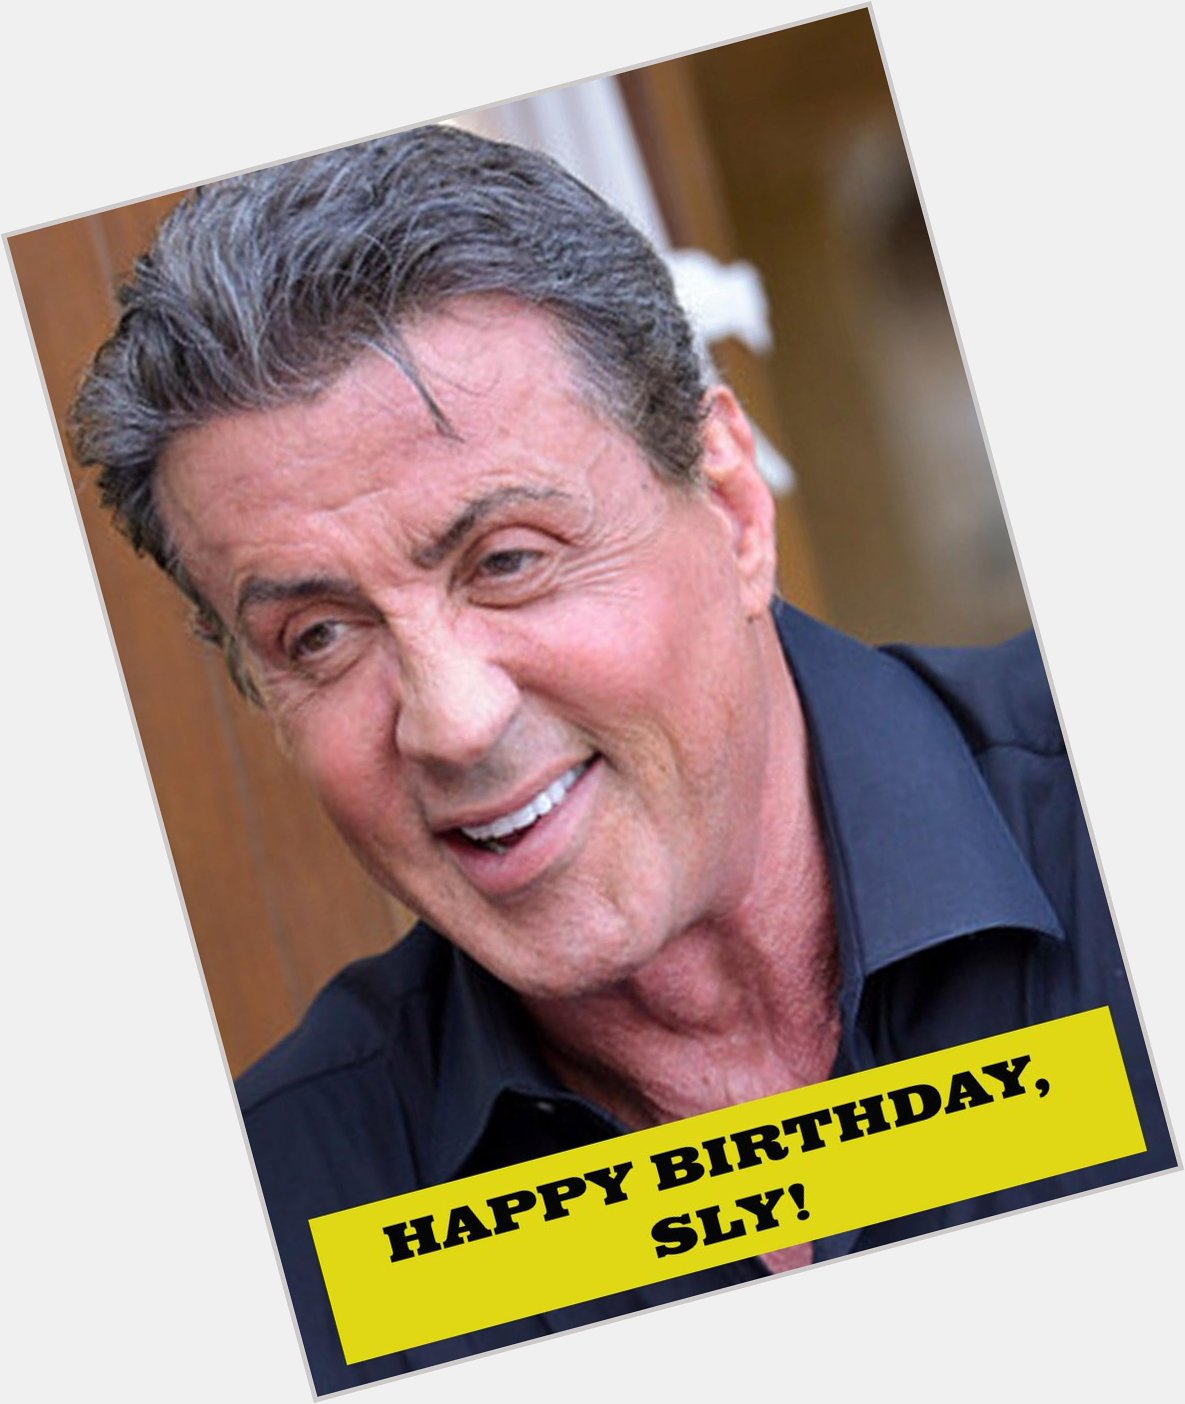 Happy Birthday to the man who brought us such iconic characters like Rocky and Rambo, Mr. Sylvester Stallone! 